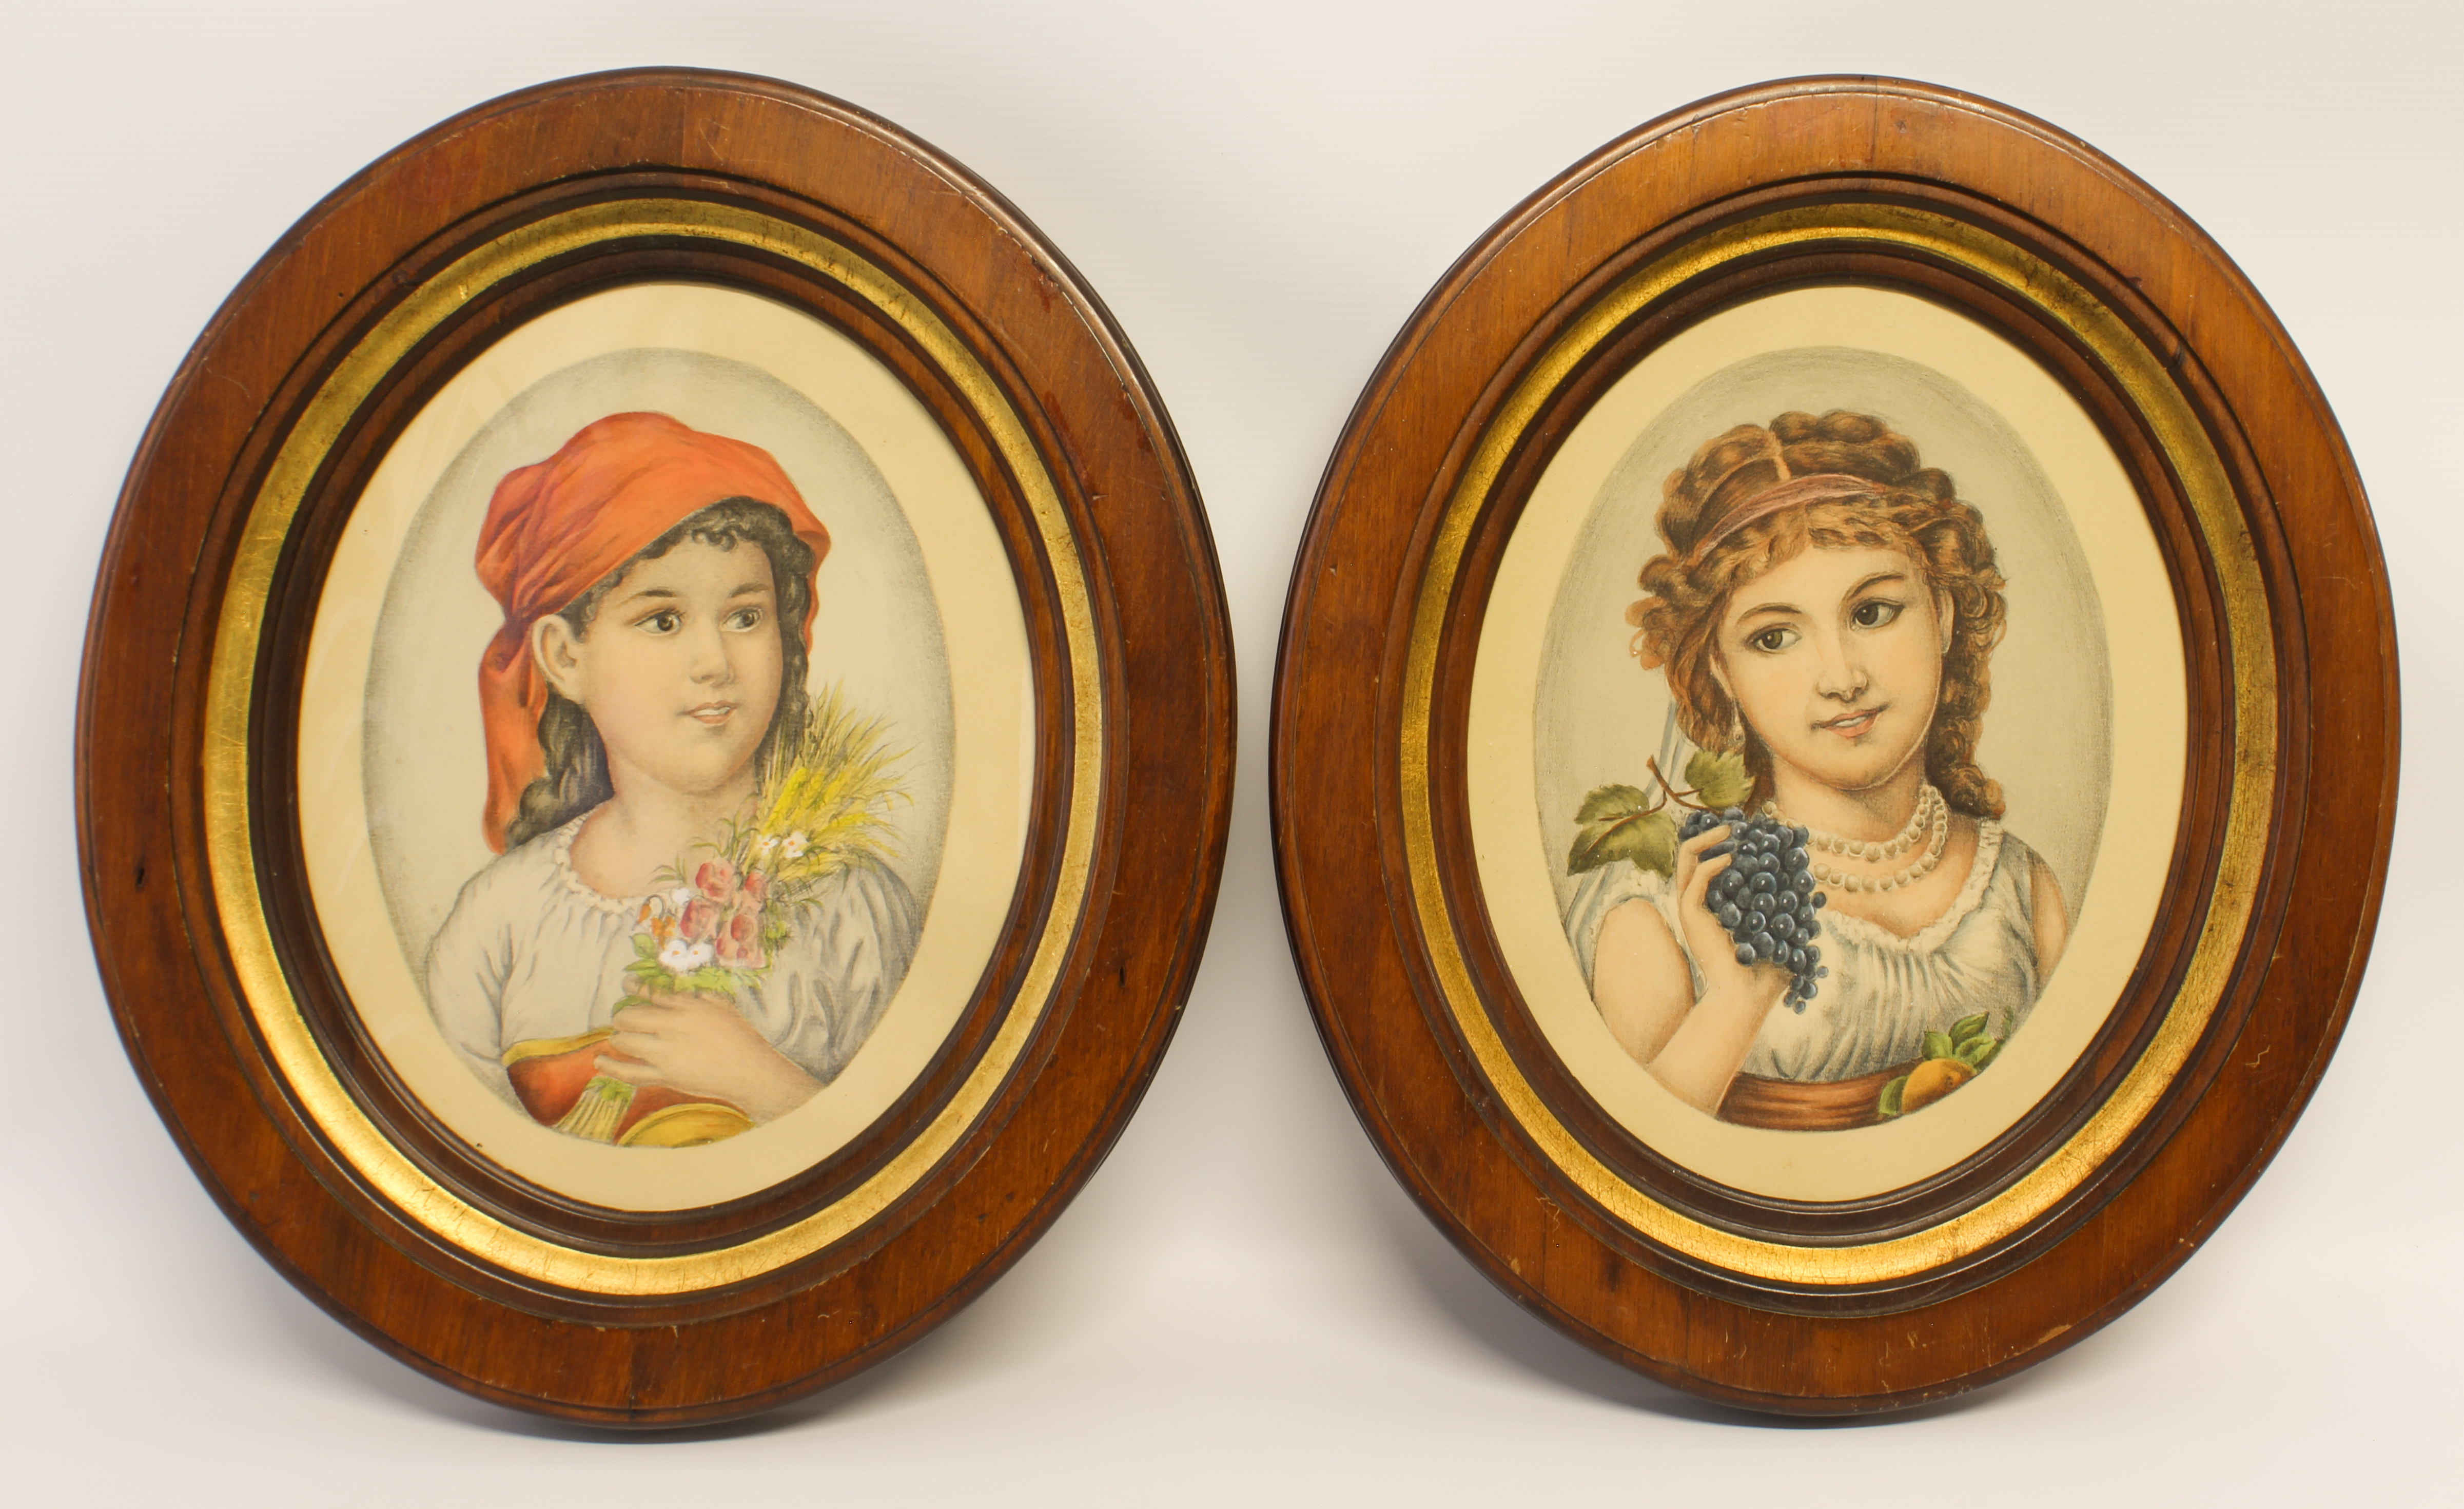 Late 19th century, Italian style Harvest Girls a pair of hand-coloured prints (30 x 23.5 cm)